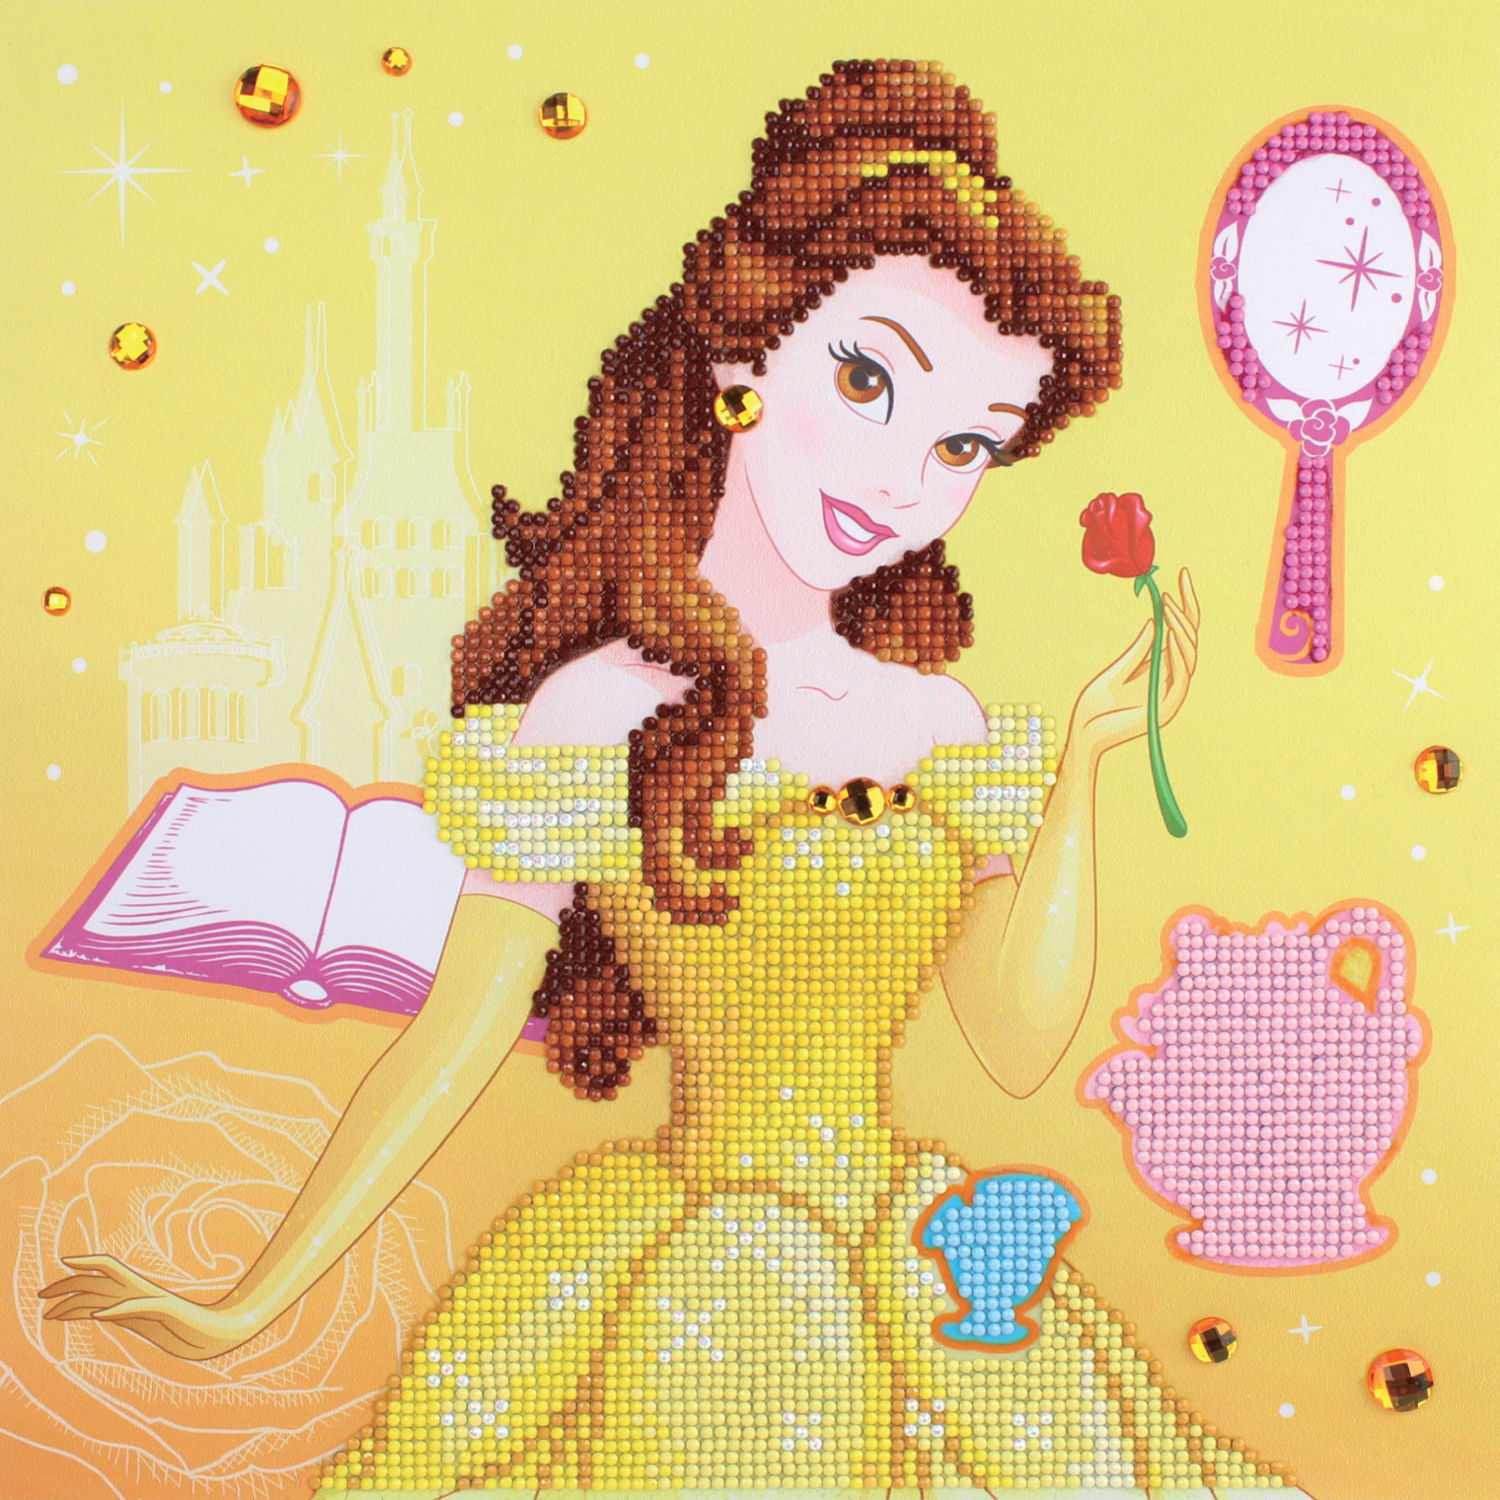 Diamond Painting Belle the Beauty and the Beast, Full Image - Painting